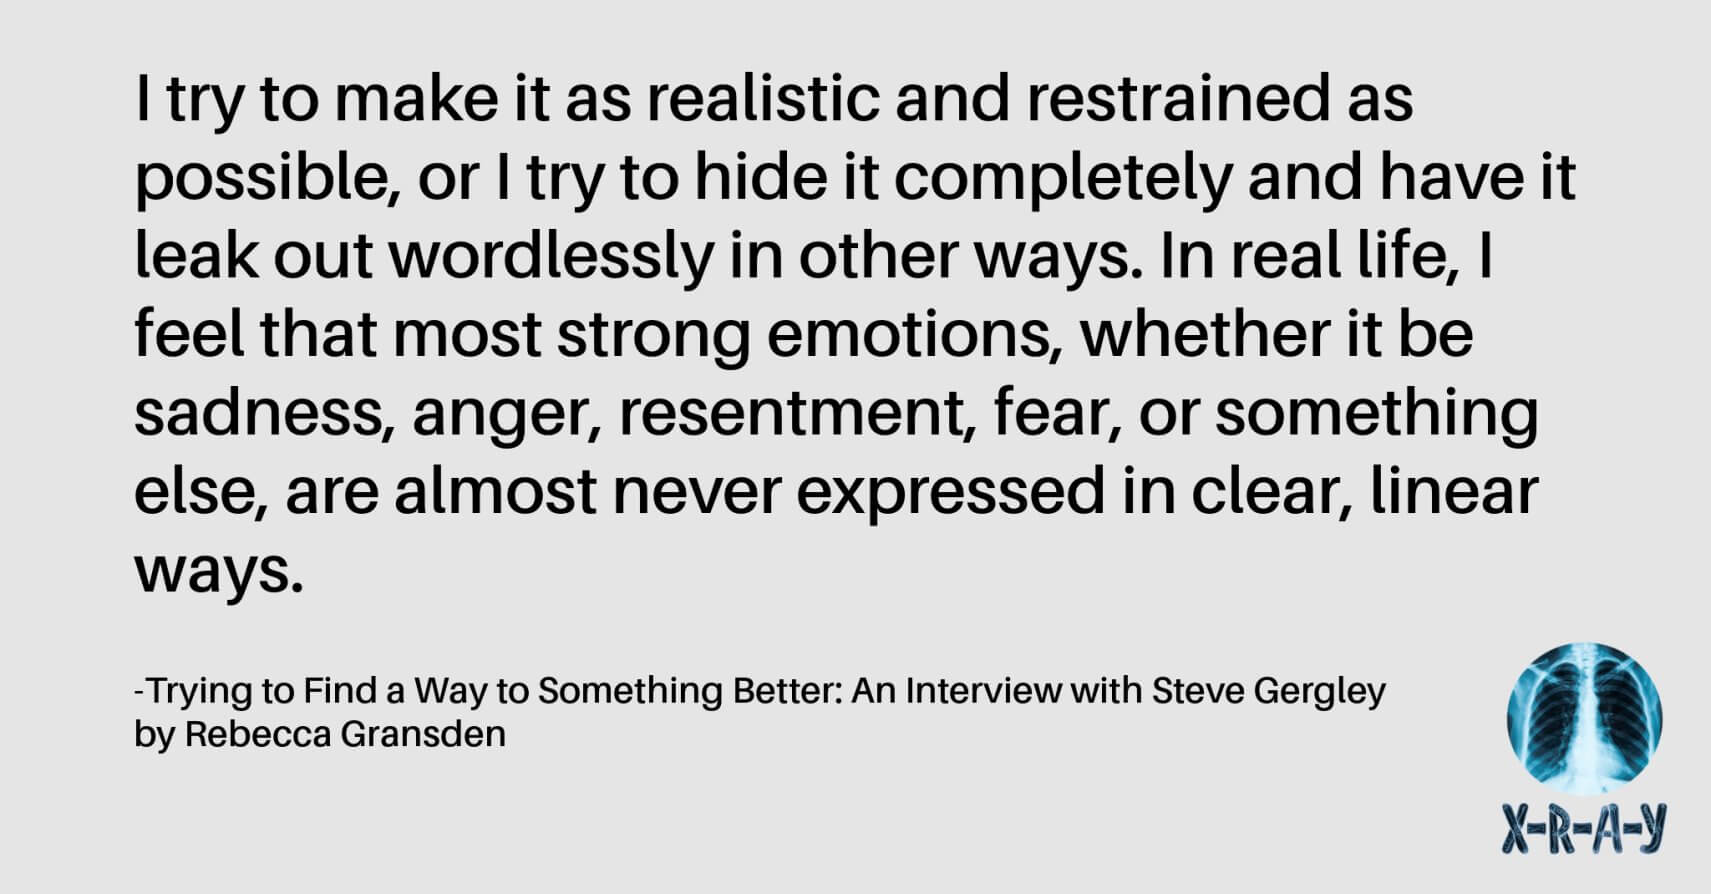 TRYING TO FIND SOMETHING BETTER: An Interview with Steve Gergley